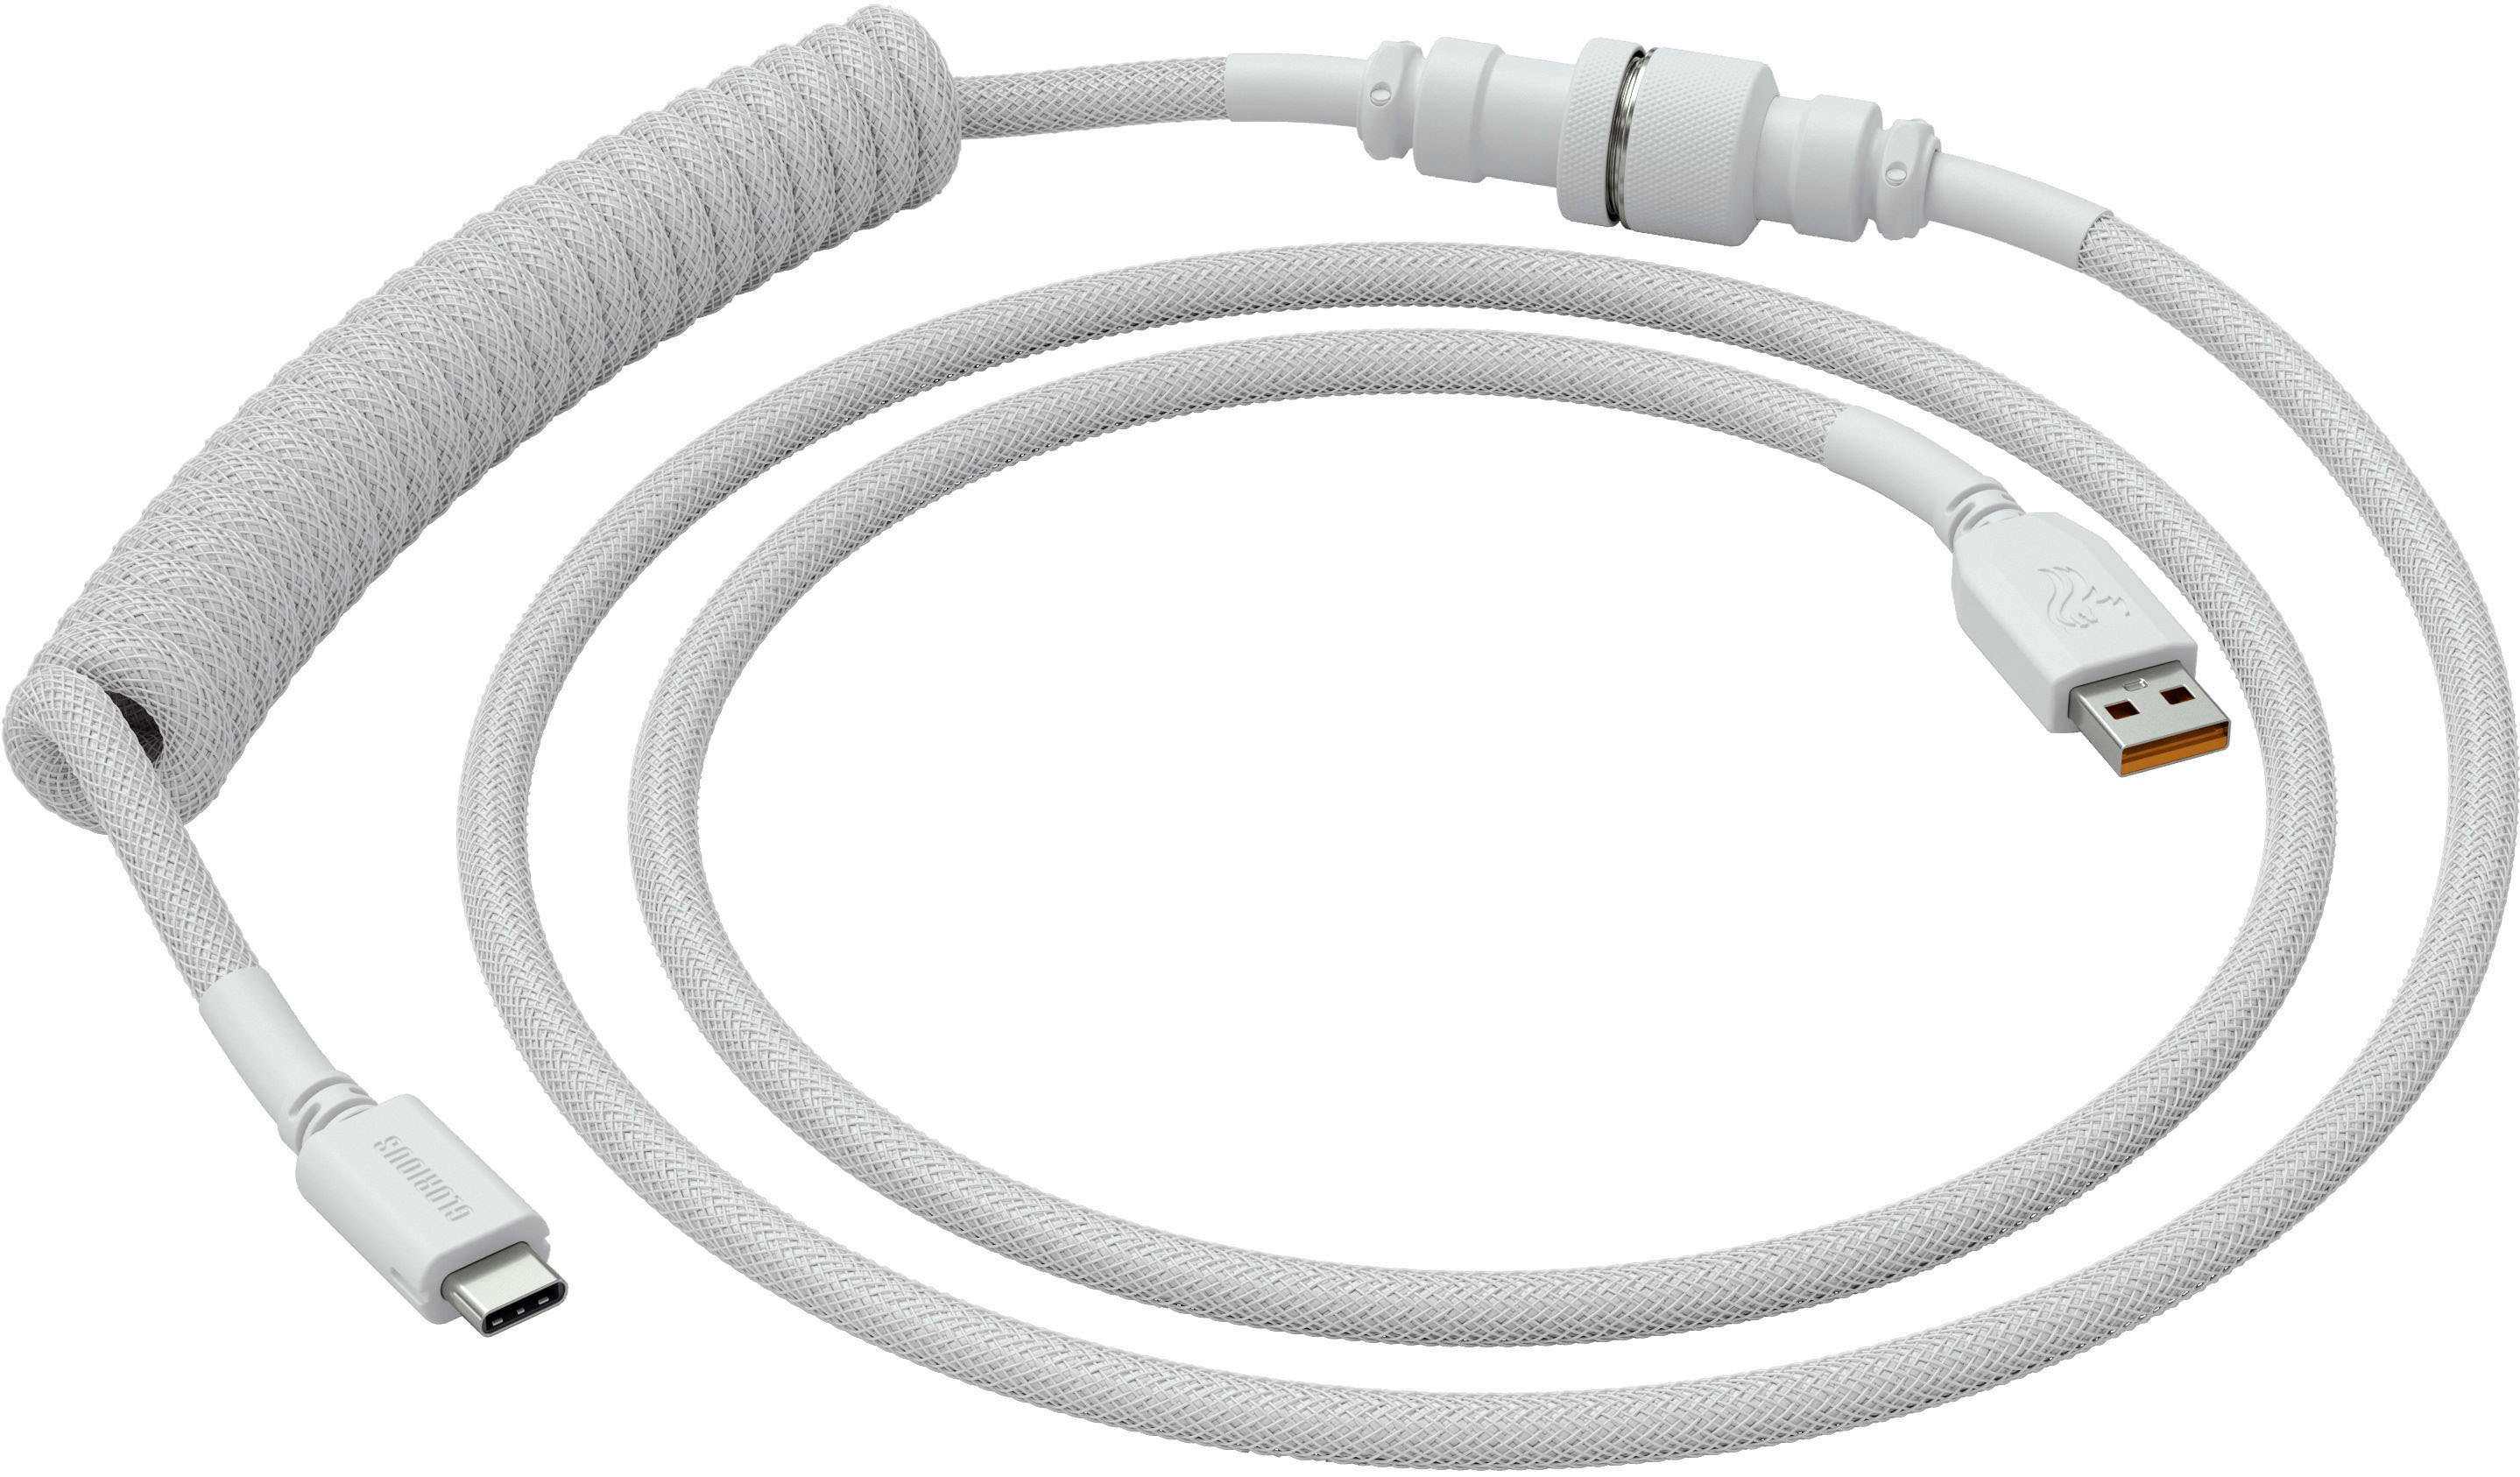 Coiled Keyboard Cable for Mechanical Keyboards - USB-C - Glorious Gaming